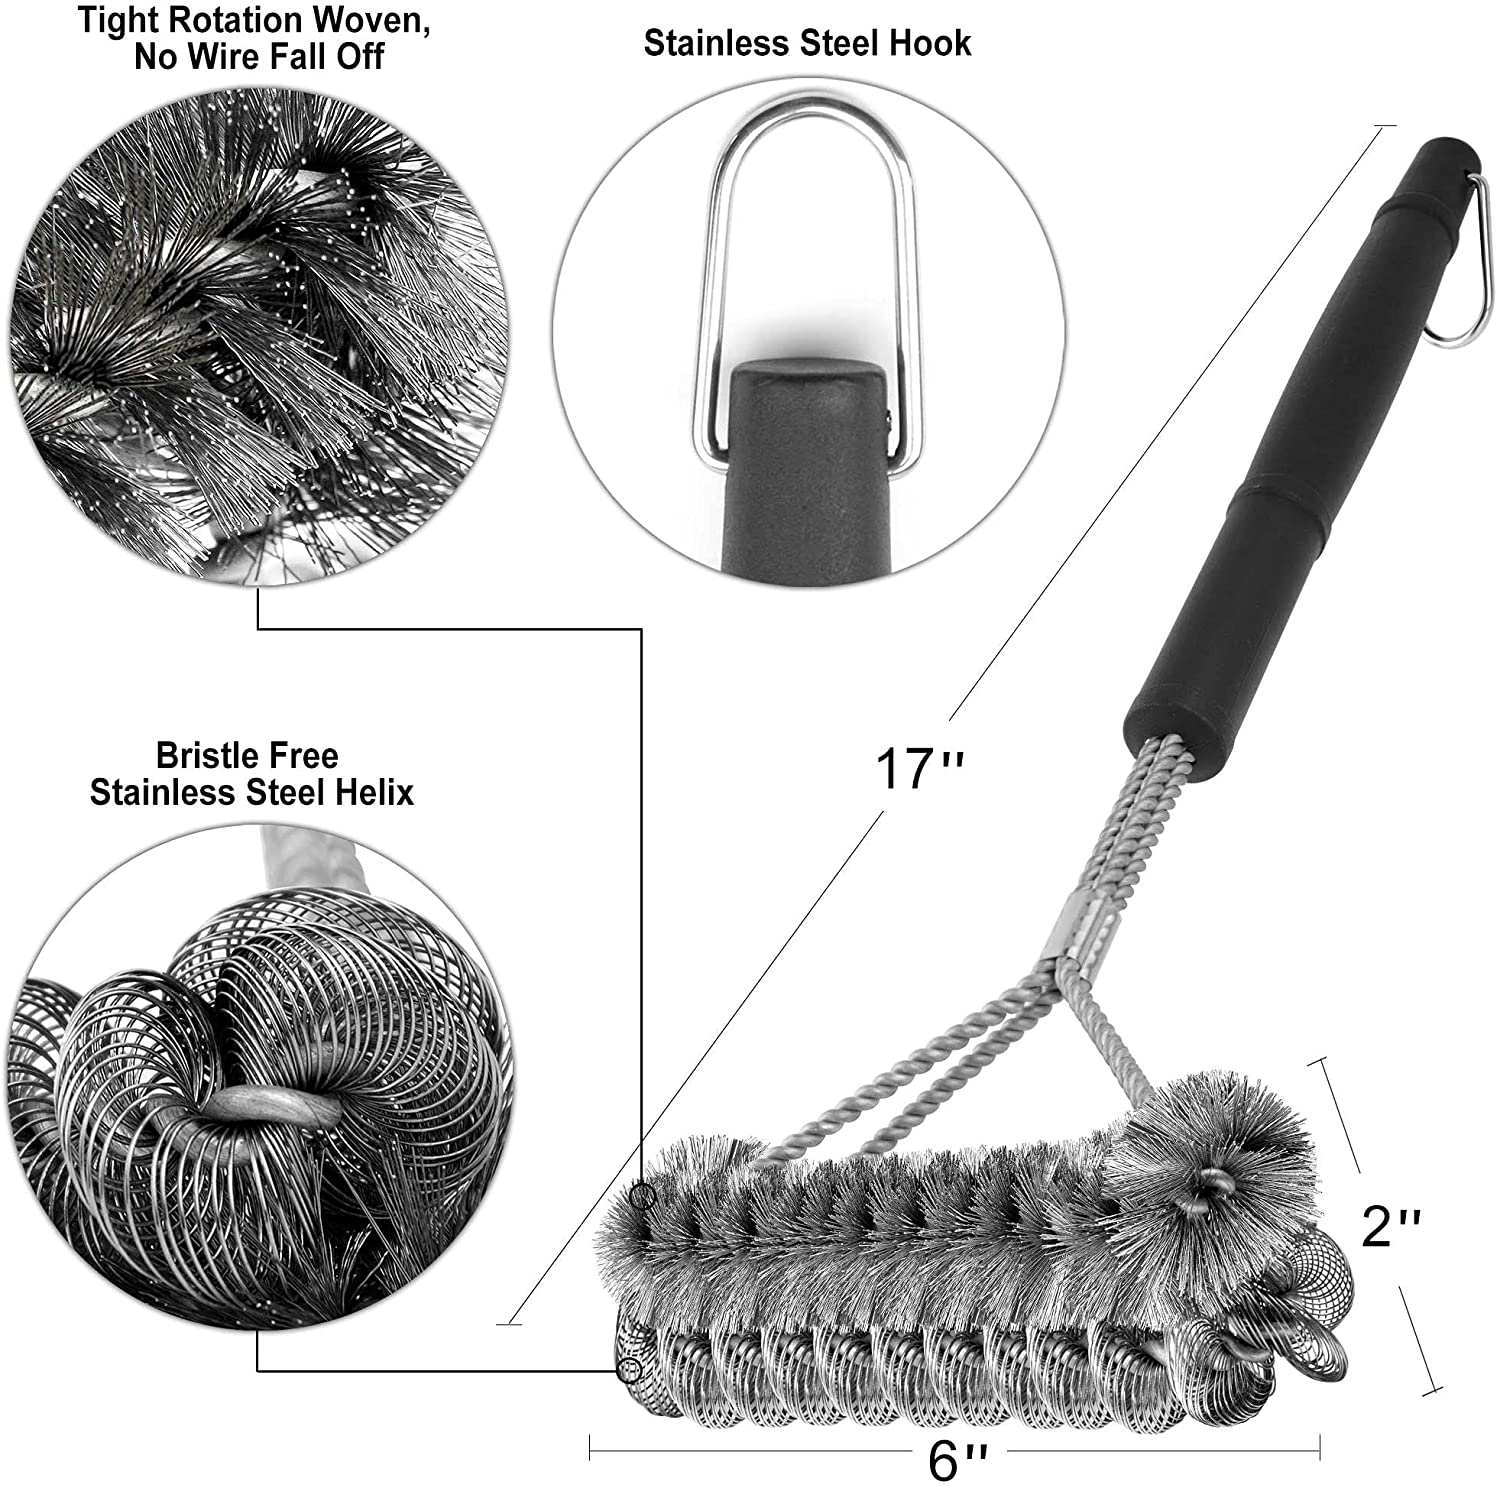 GRILLART Grill Brush and Scraper 18 Inch - Wire Bristle Brush Double  Scrapers - Barbecue Cleaning Brush for Gas/Charcoal Grilling Grates -  Universal